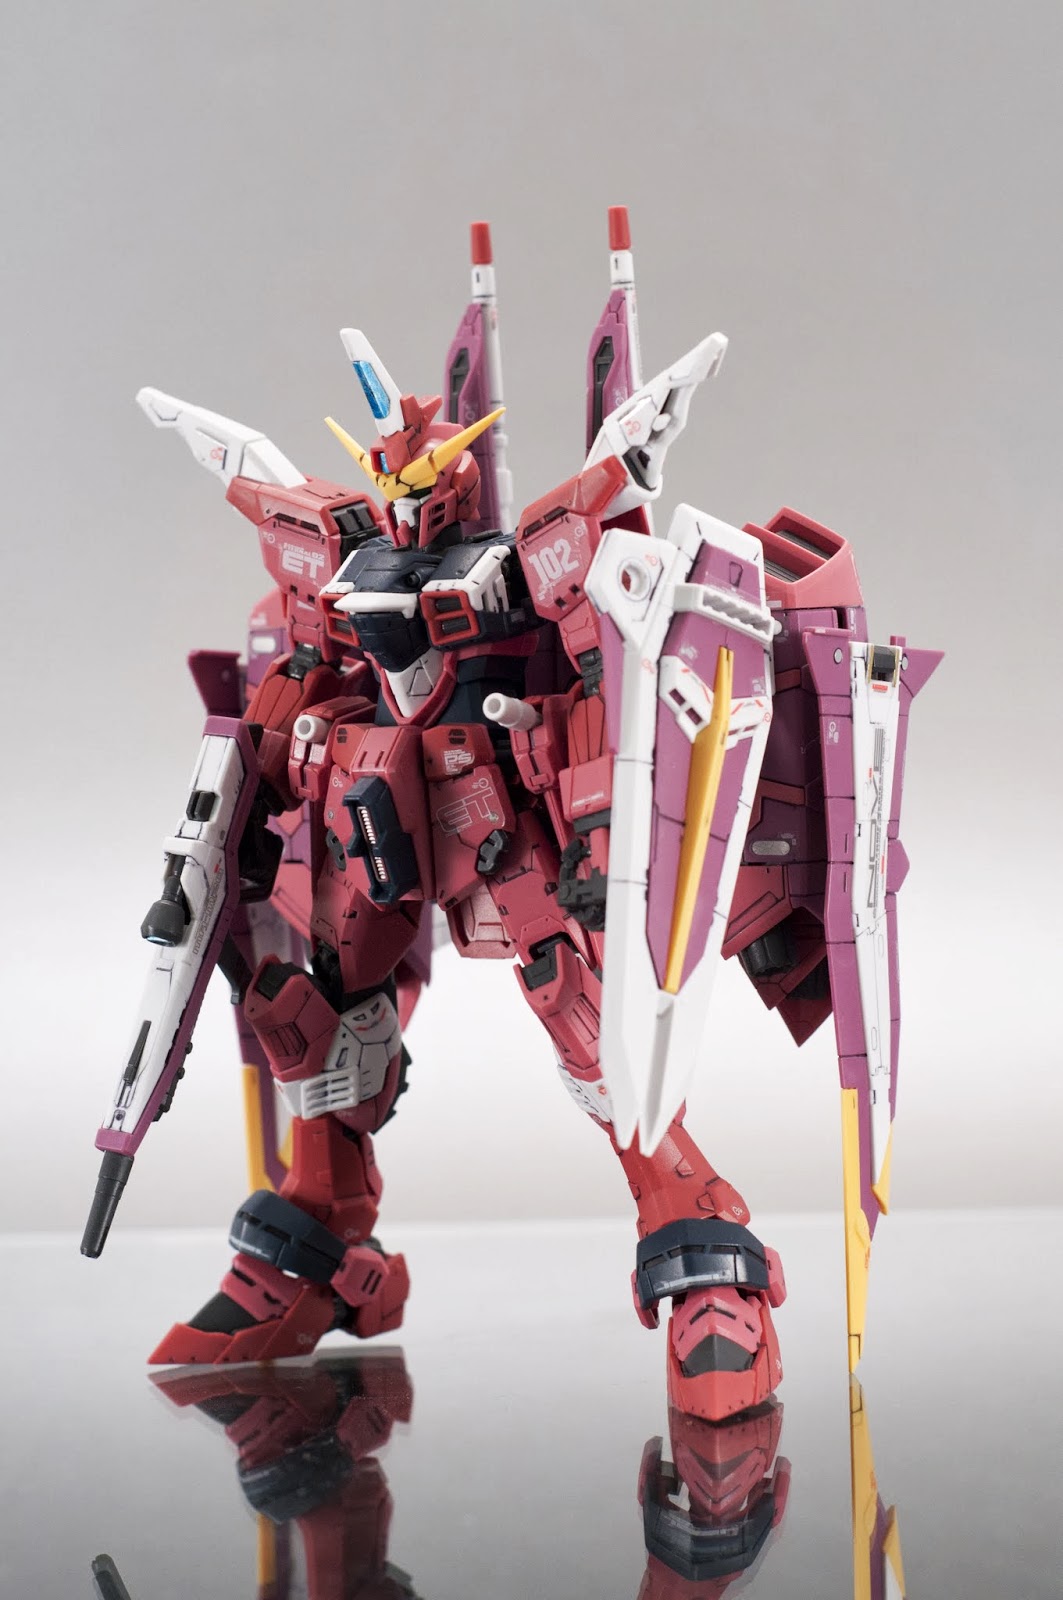 Real Grade Justice Kit Review